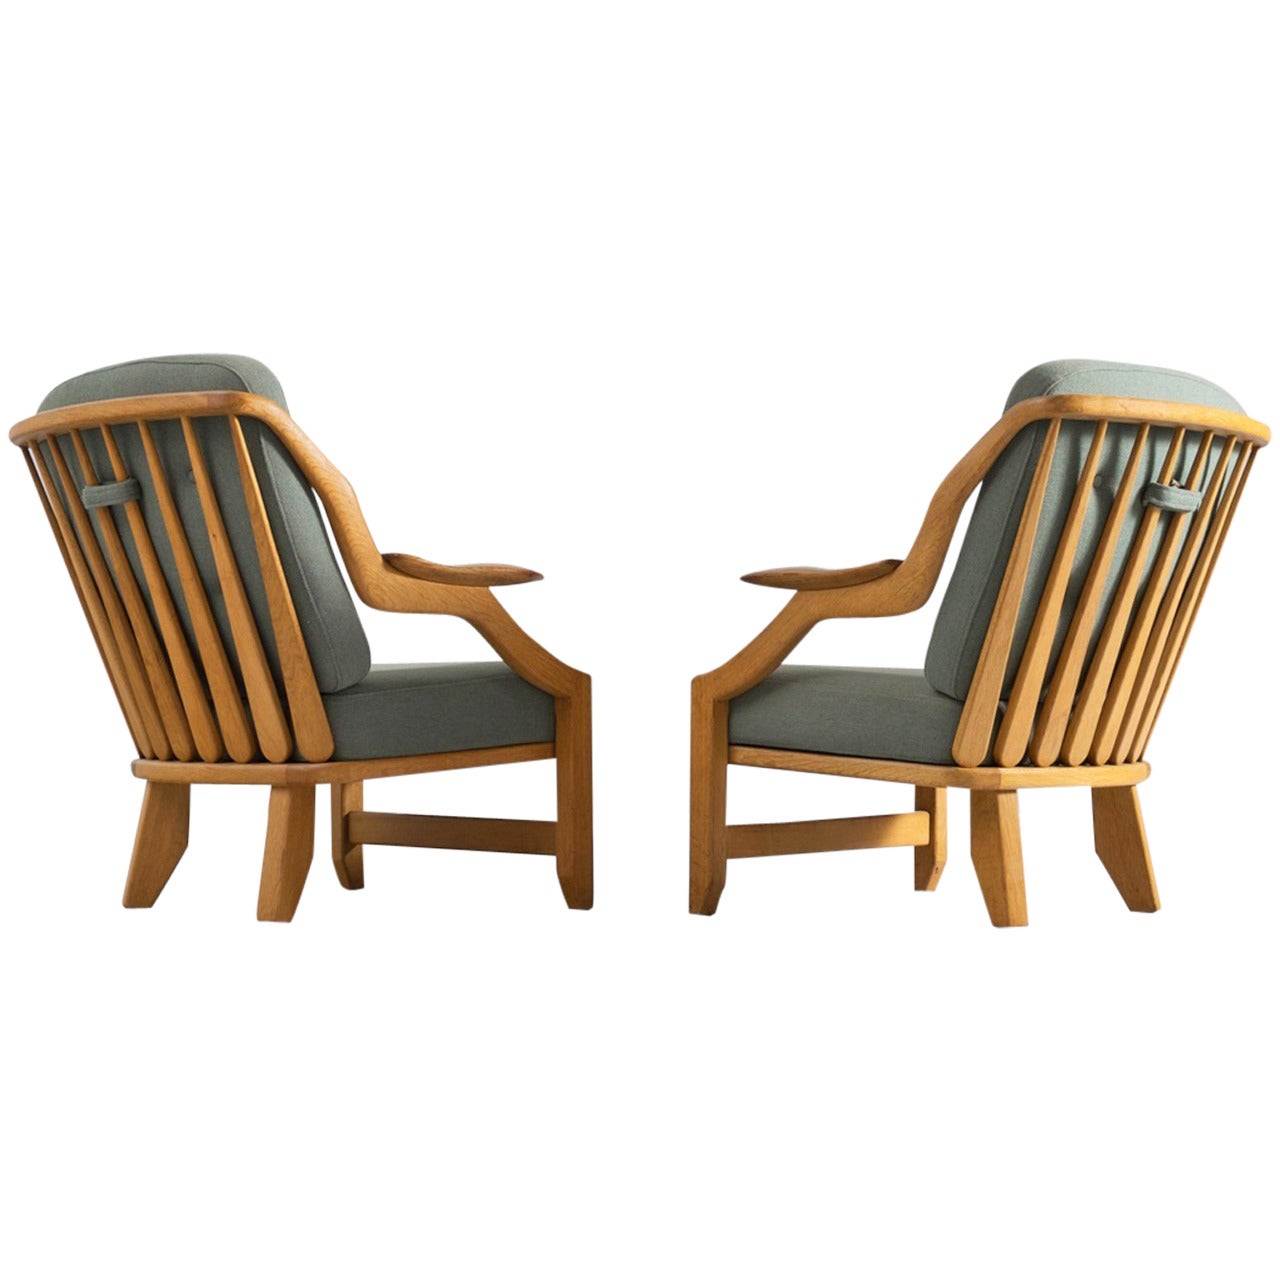 Pair of slat back lounge chairs by Guillerme & Chambron